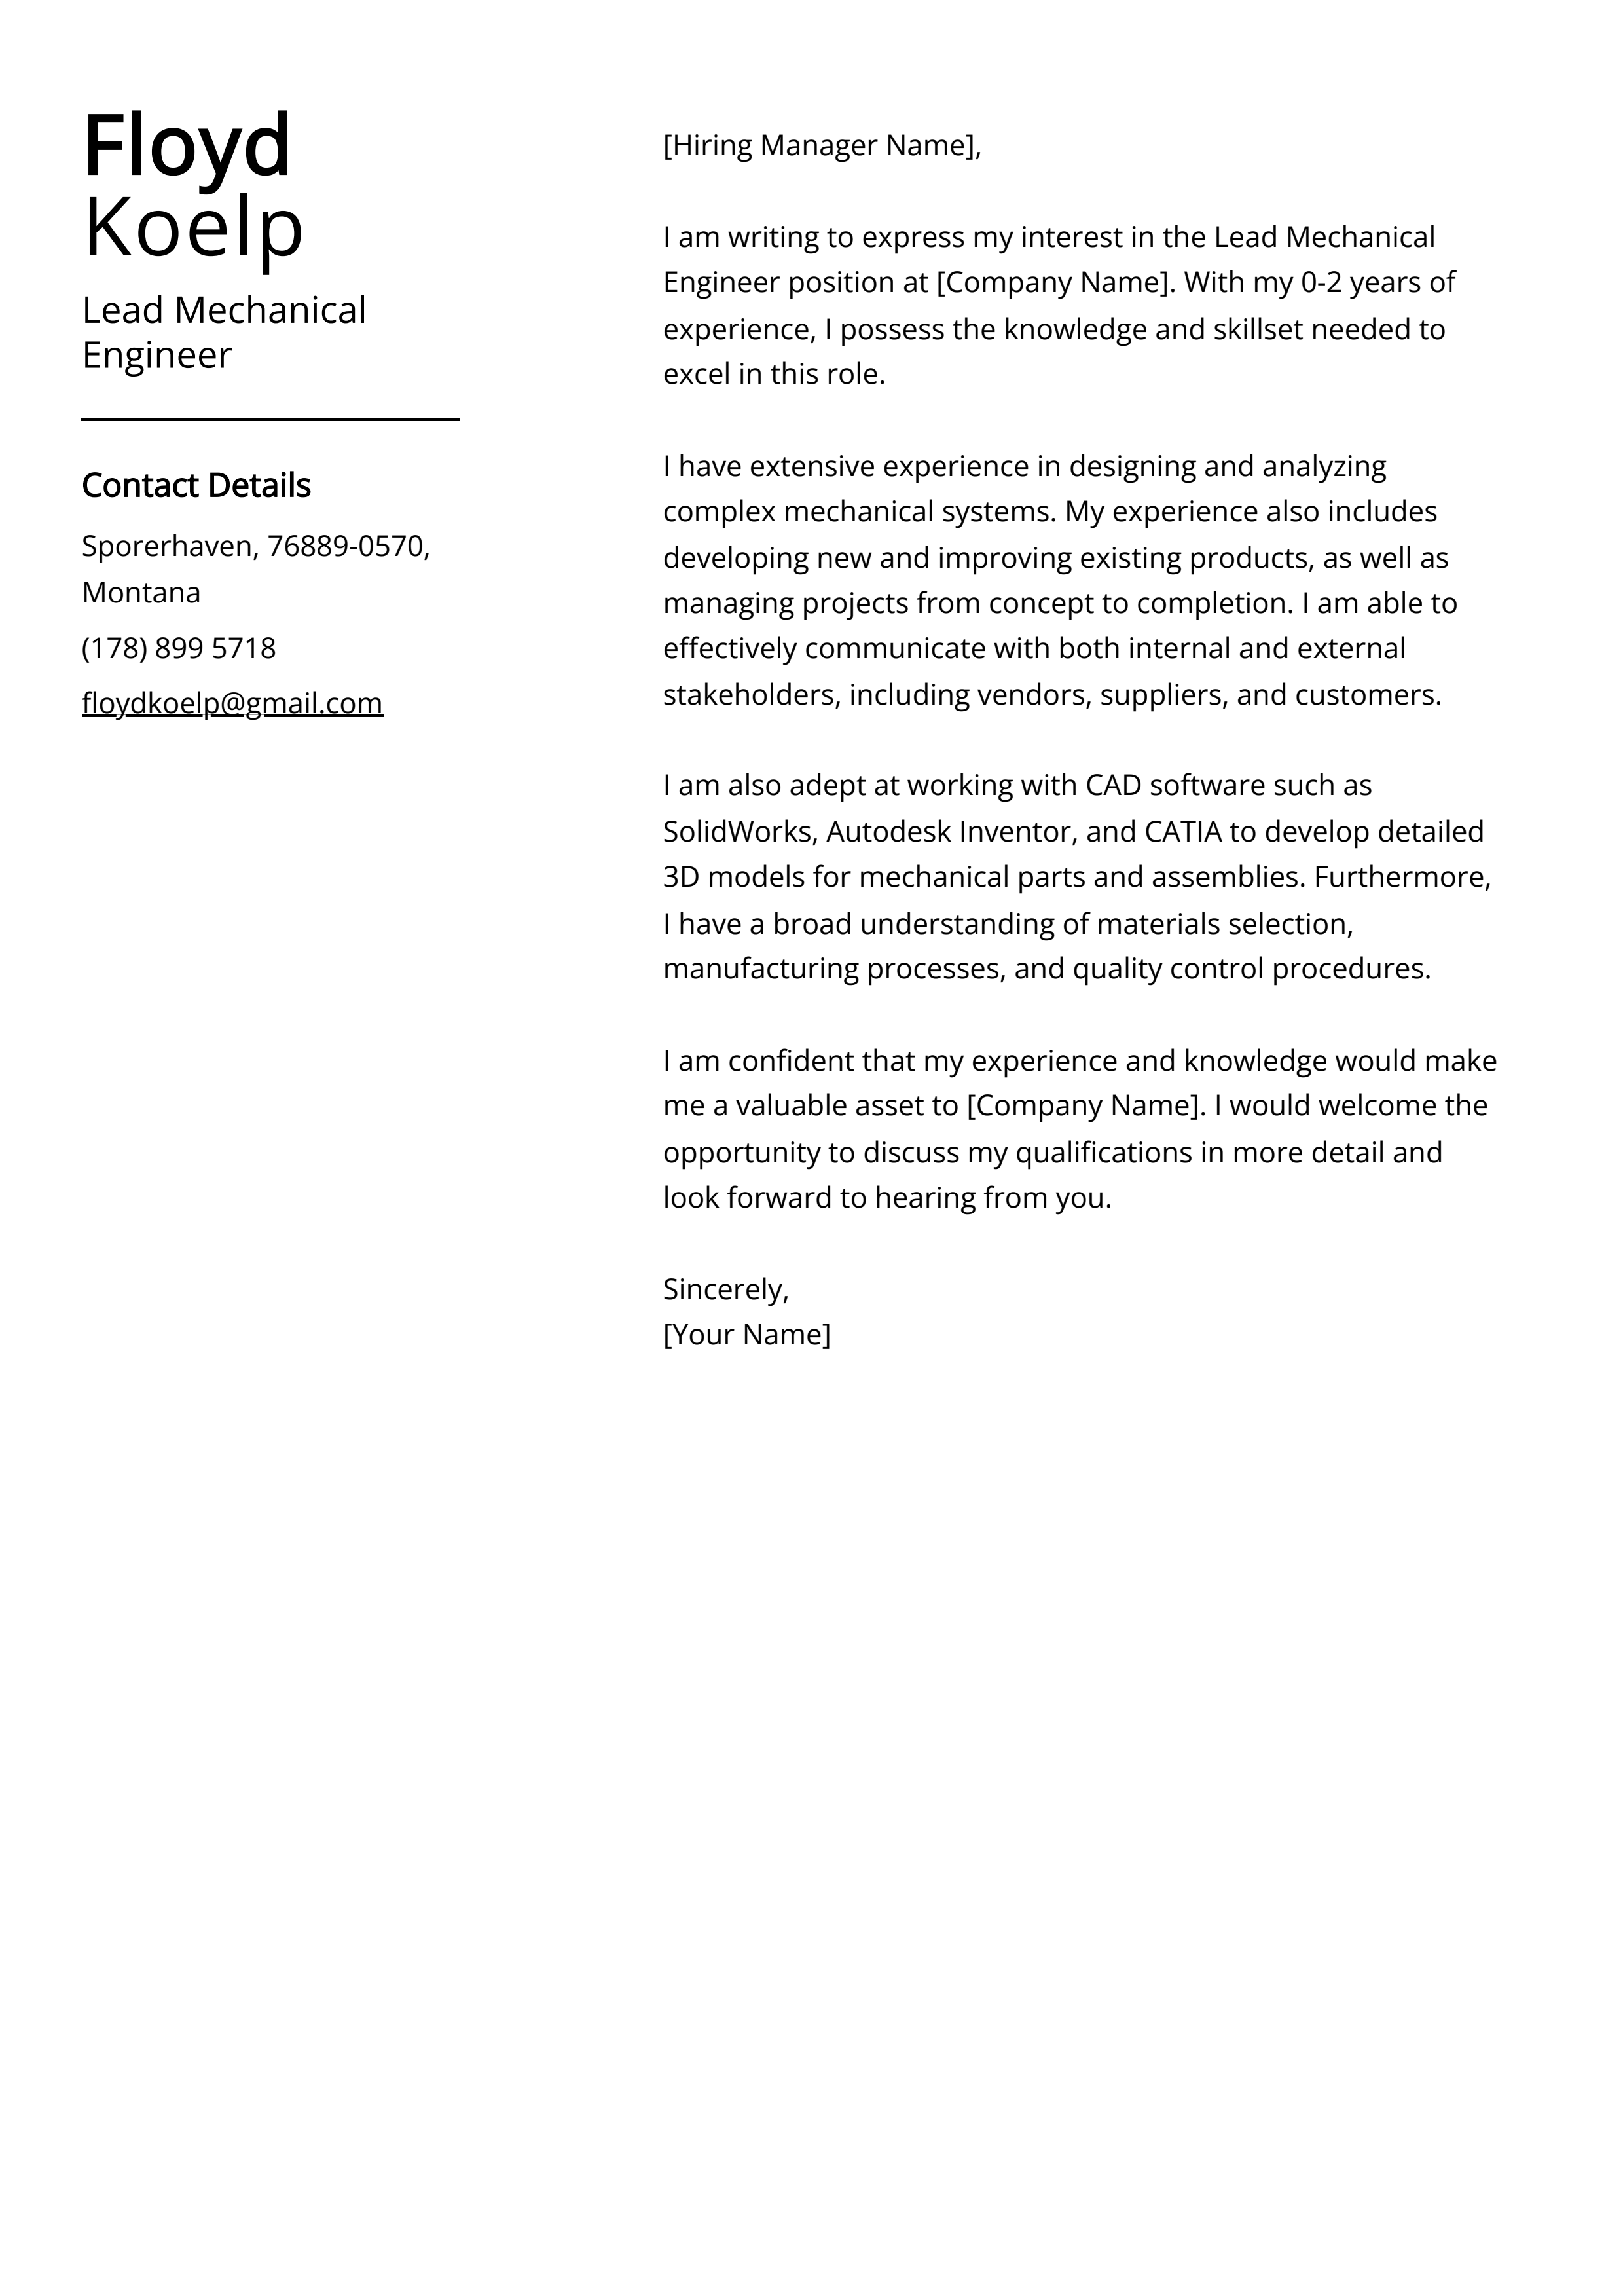 Lead Mechanical Engineer Cover Letter Example